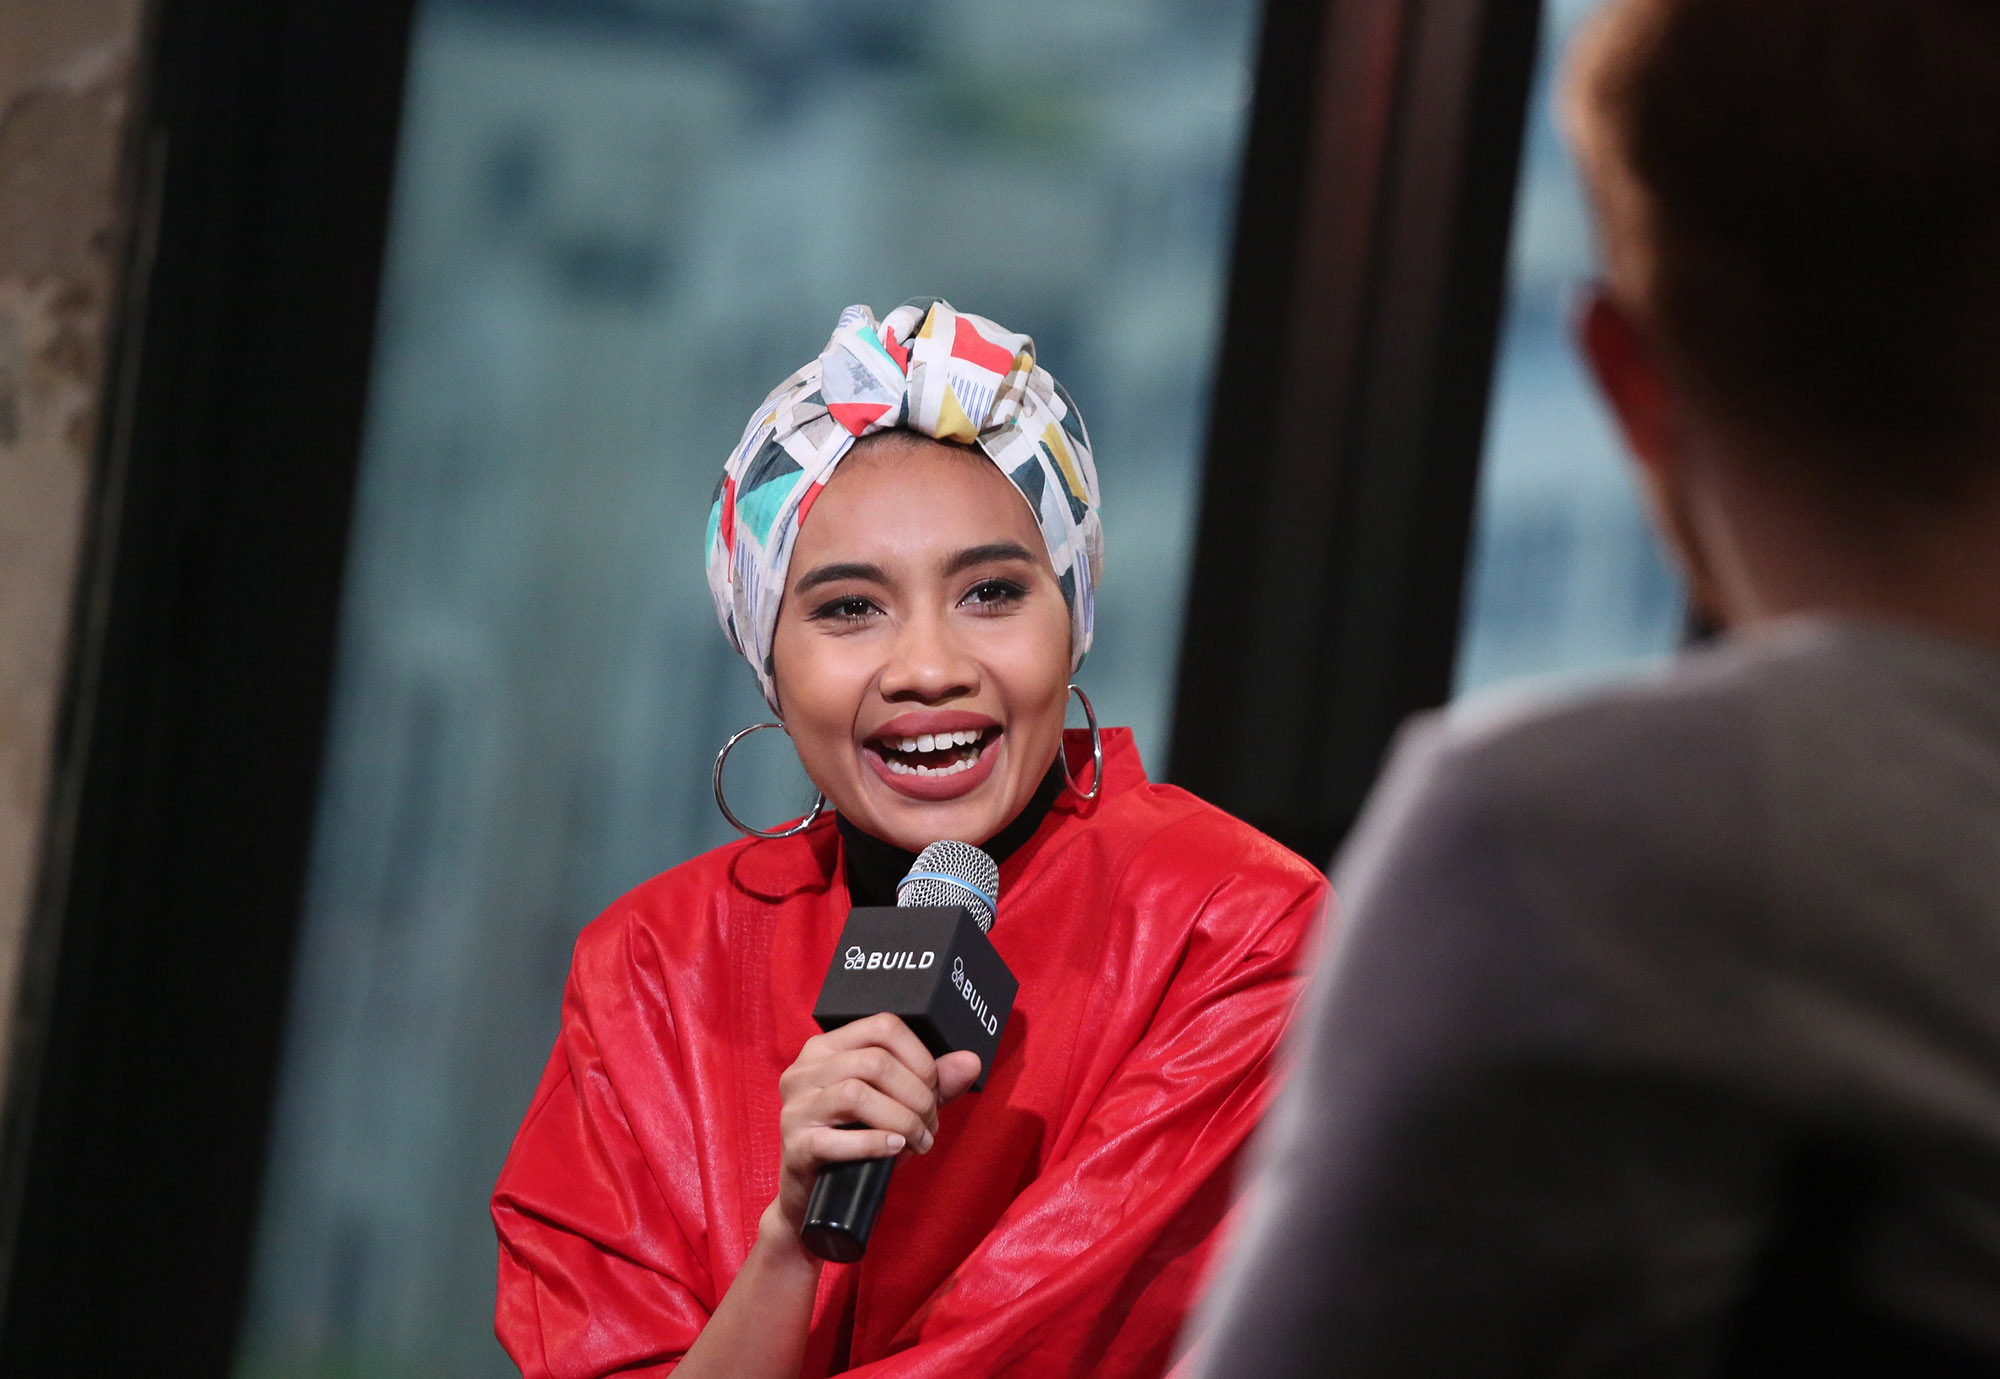 AOL Build Presents: Singer Yuna's New Album "Chapters"